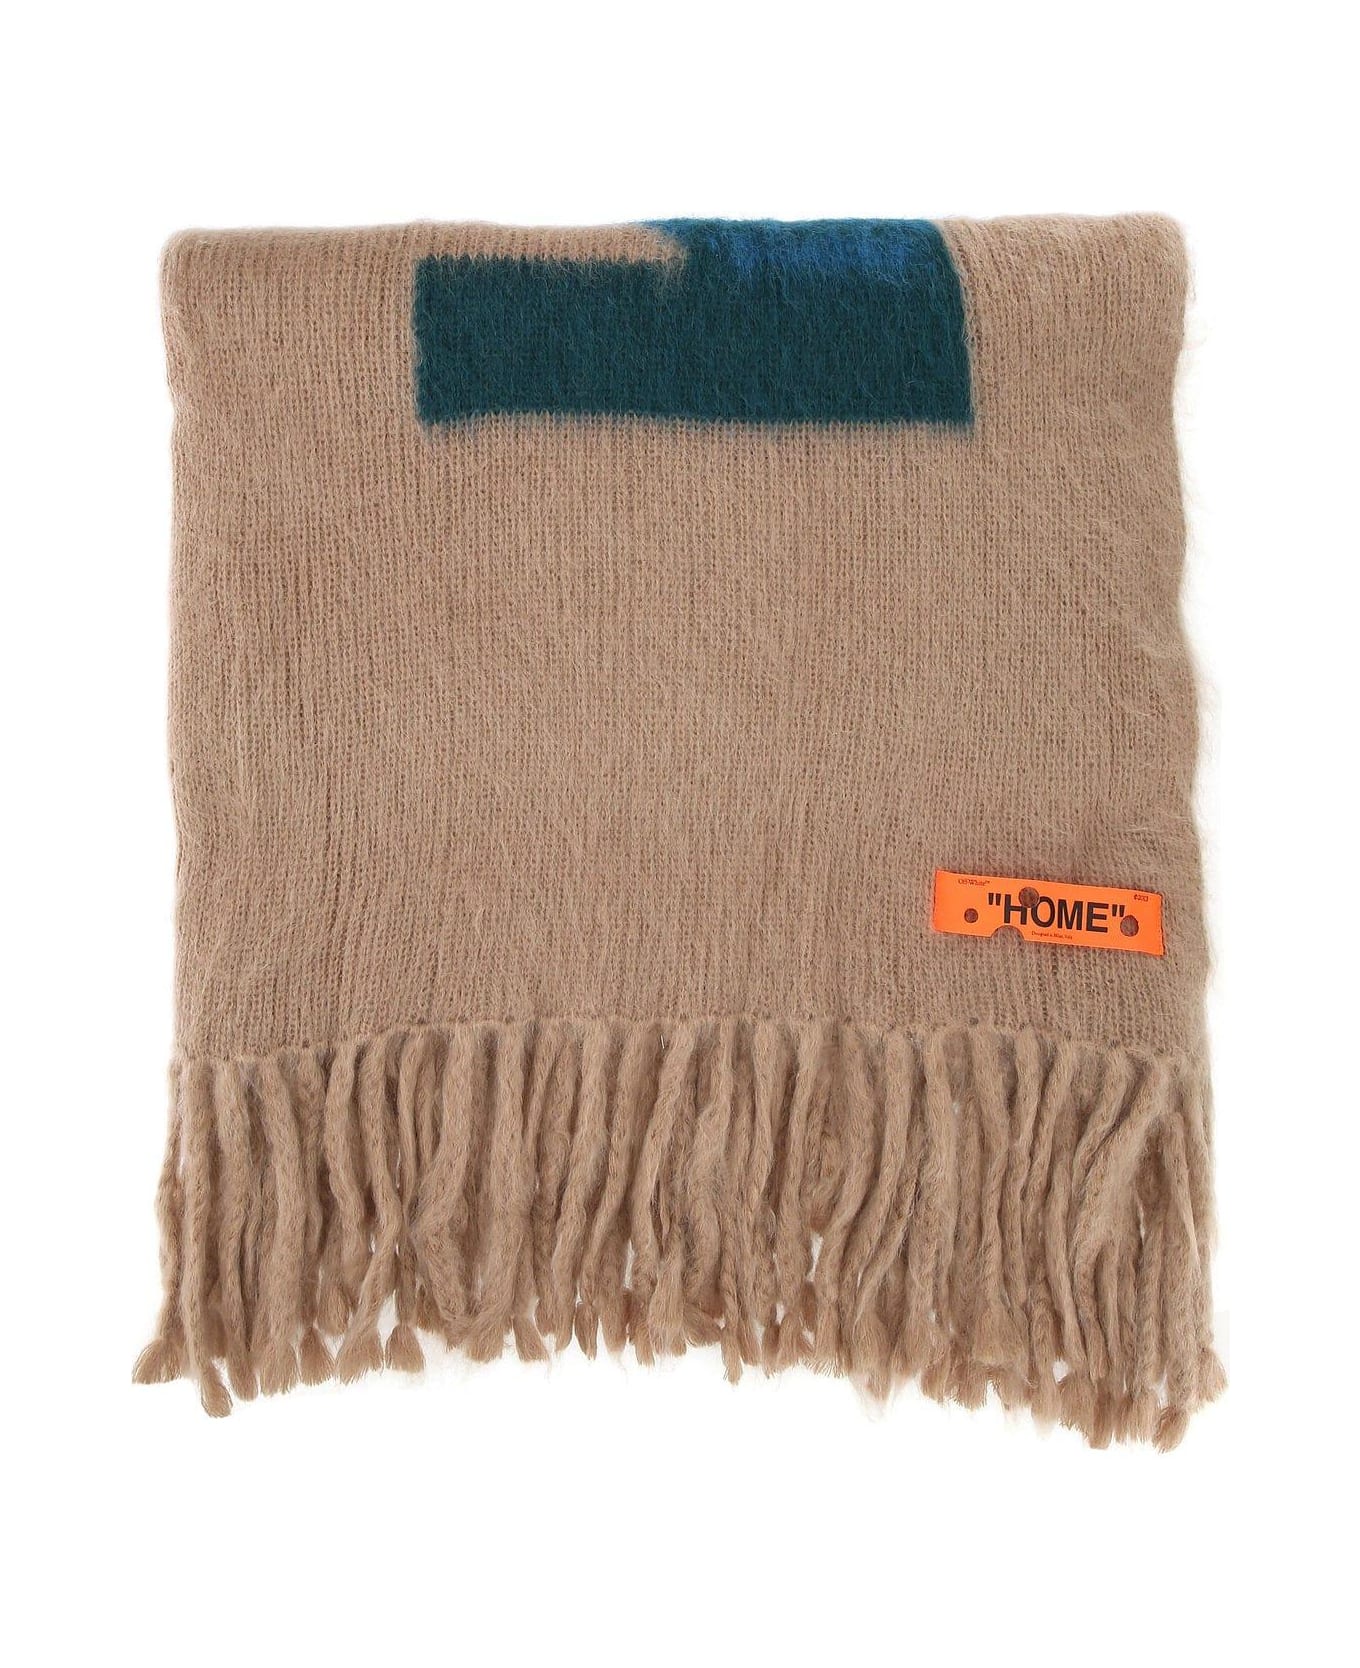 Off-White Cappuccino Mohair Blend Blanket - Camel